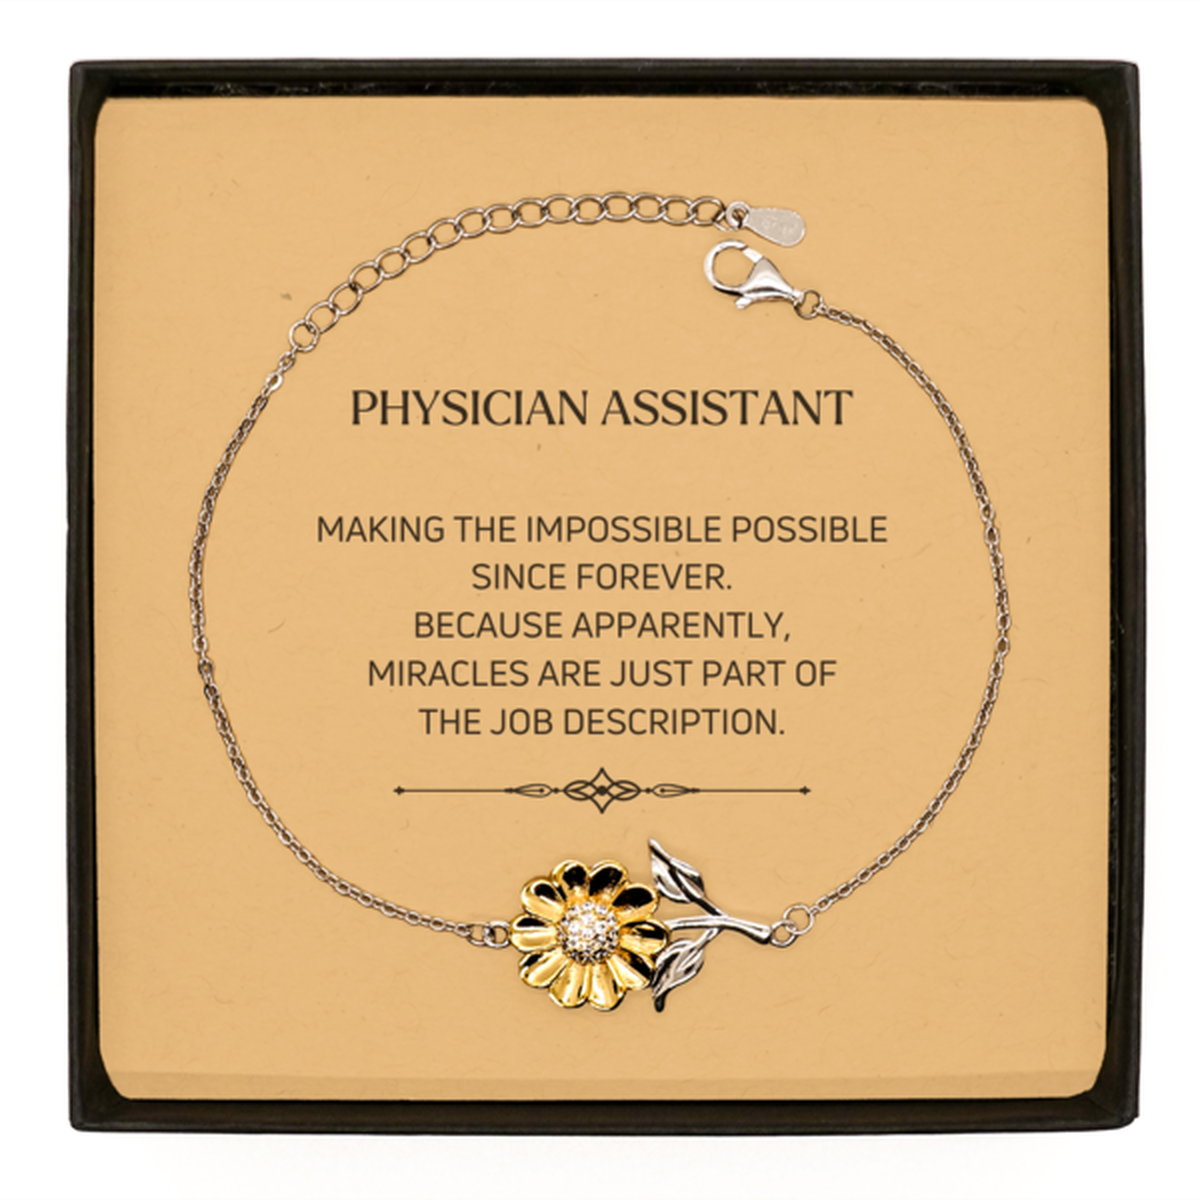 Funny Physician Assistant Gifts, Miracles are just part of the job description, Inspirational Birthday Sunflower Bracelet For Physician Assistant, Men, Women, Coworkers, Friends, Boss